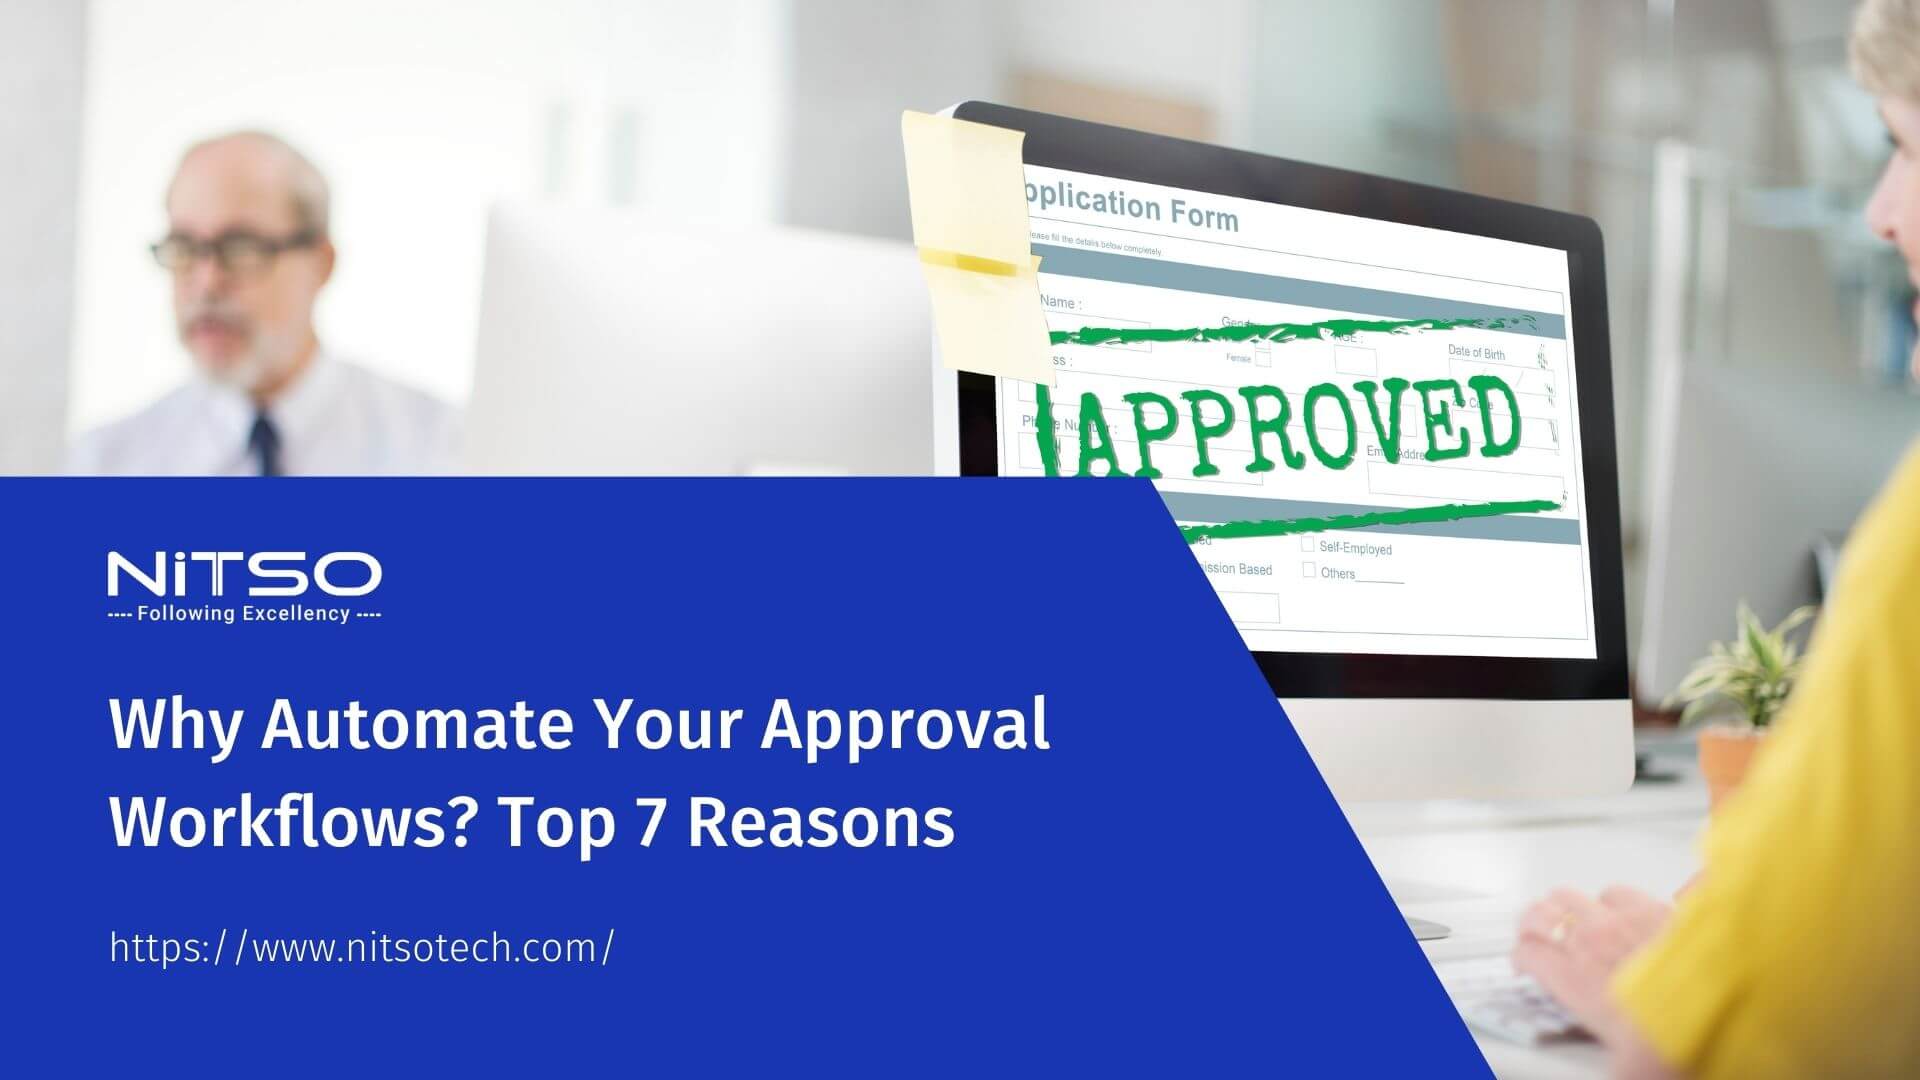 Top 7 Advantages of Automating Approvals Workflow